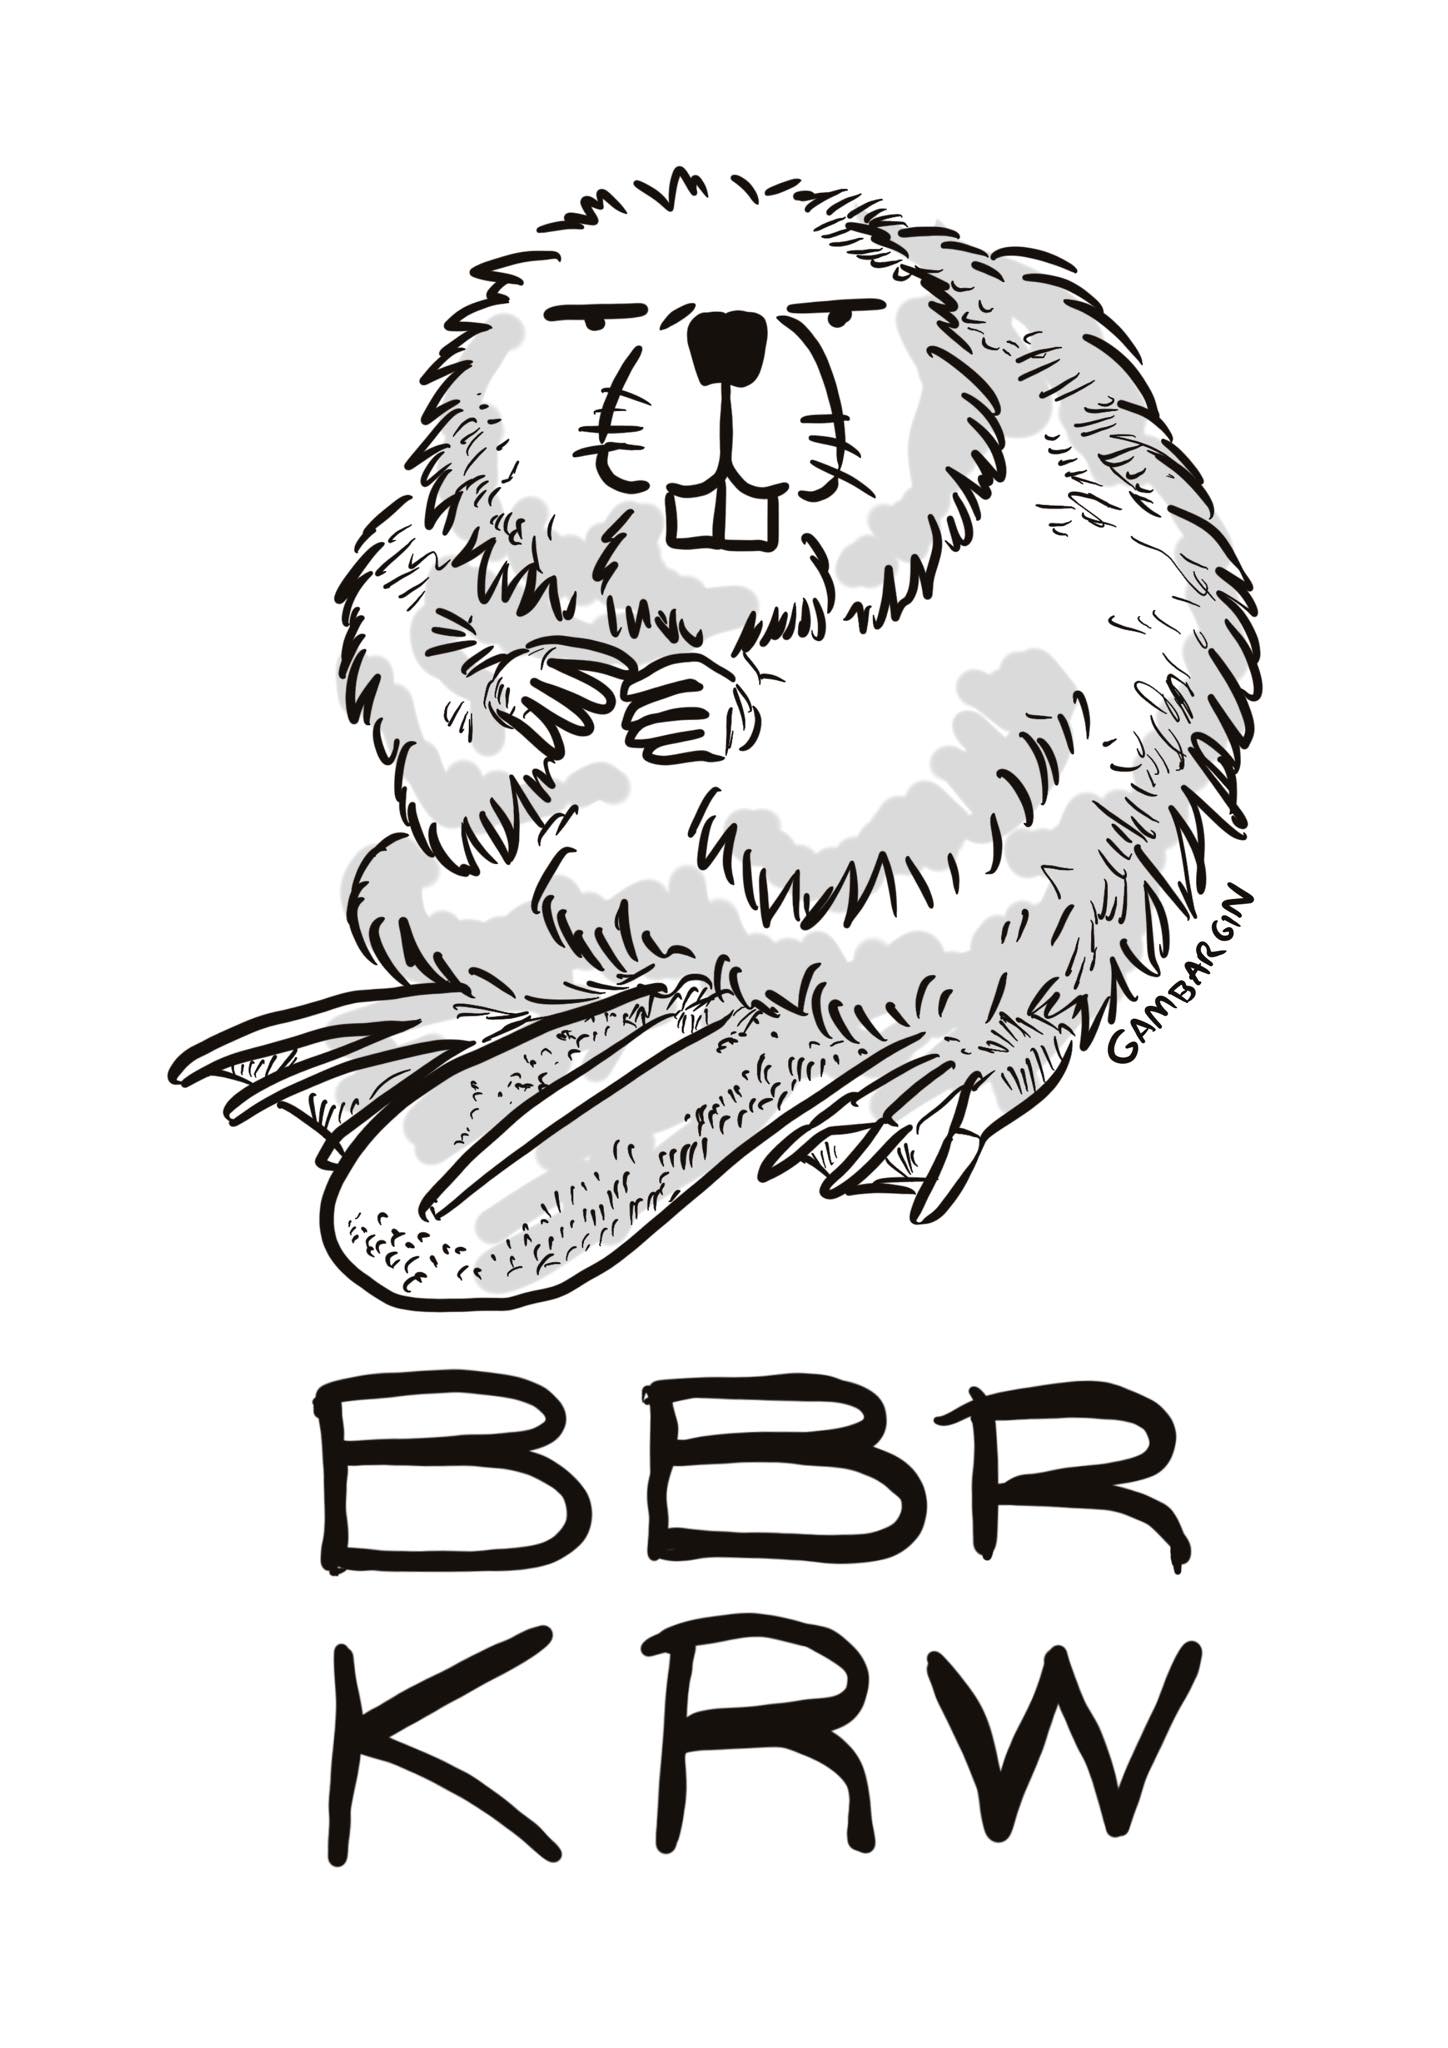 Drawing of Bóbr with caption BBR KRW meant to represent Bóbr Kurwa meme